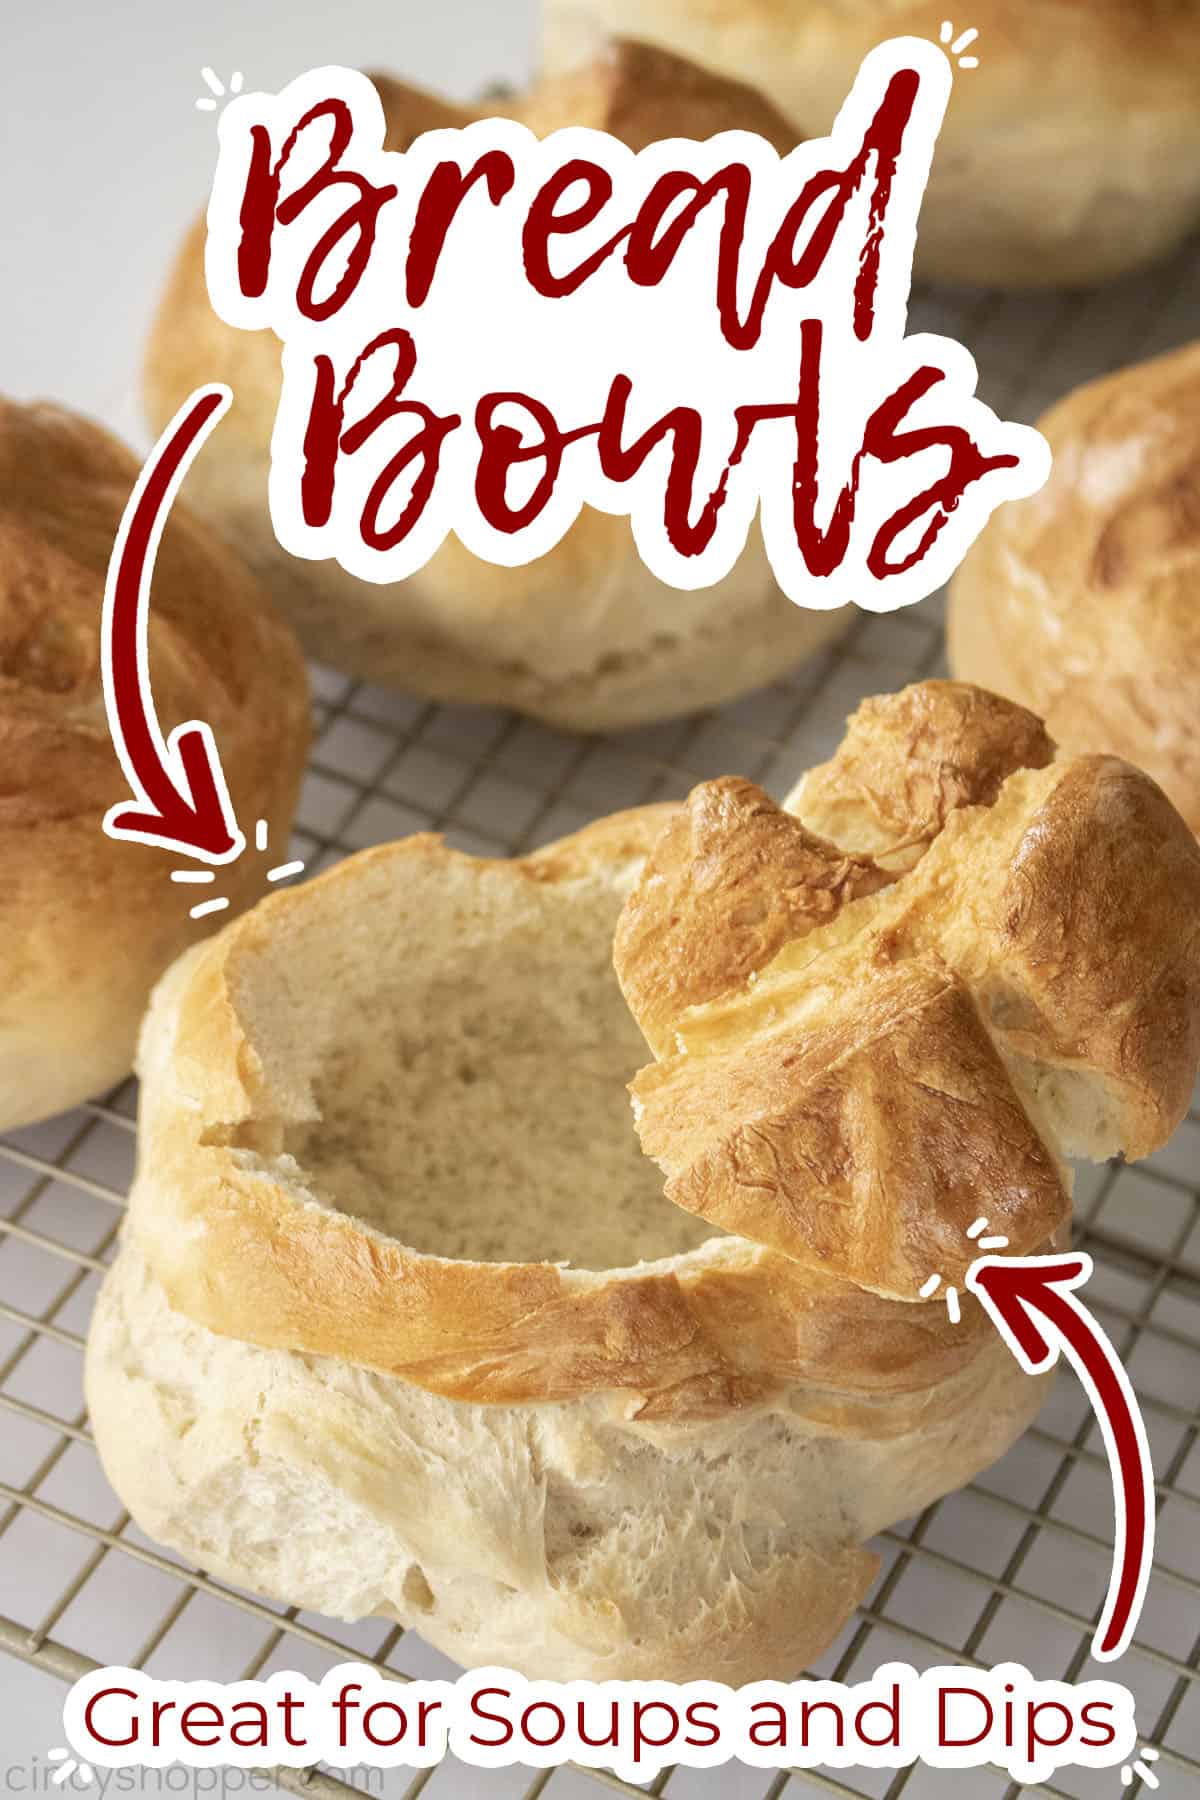 Text on image Bread Bowls Great for Soups and Dips